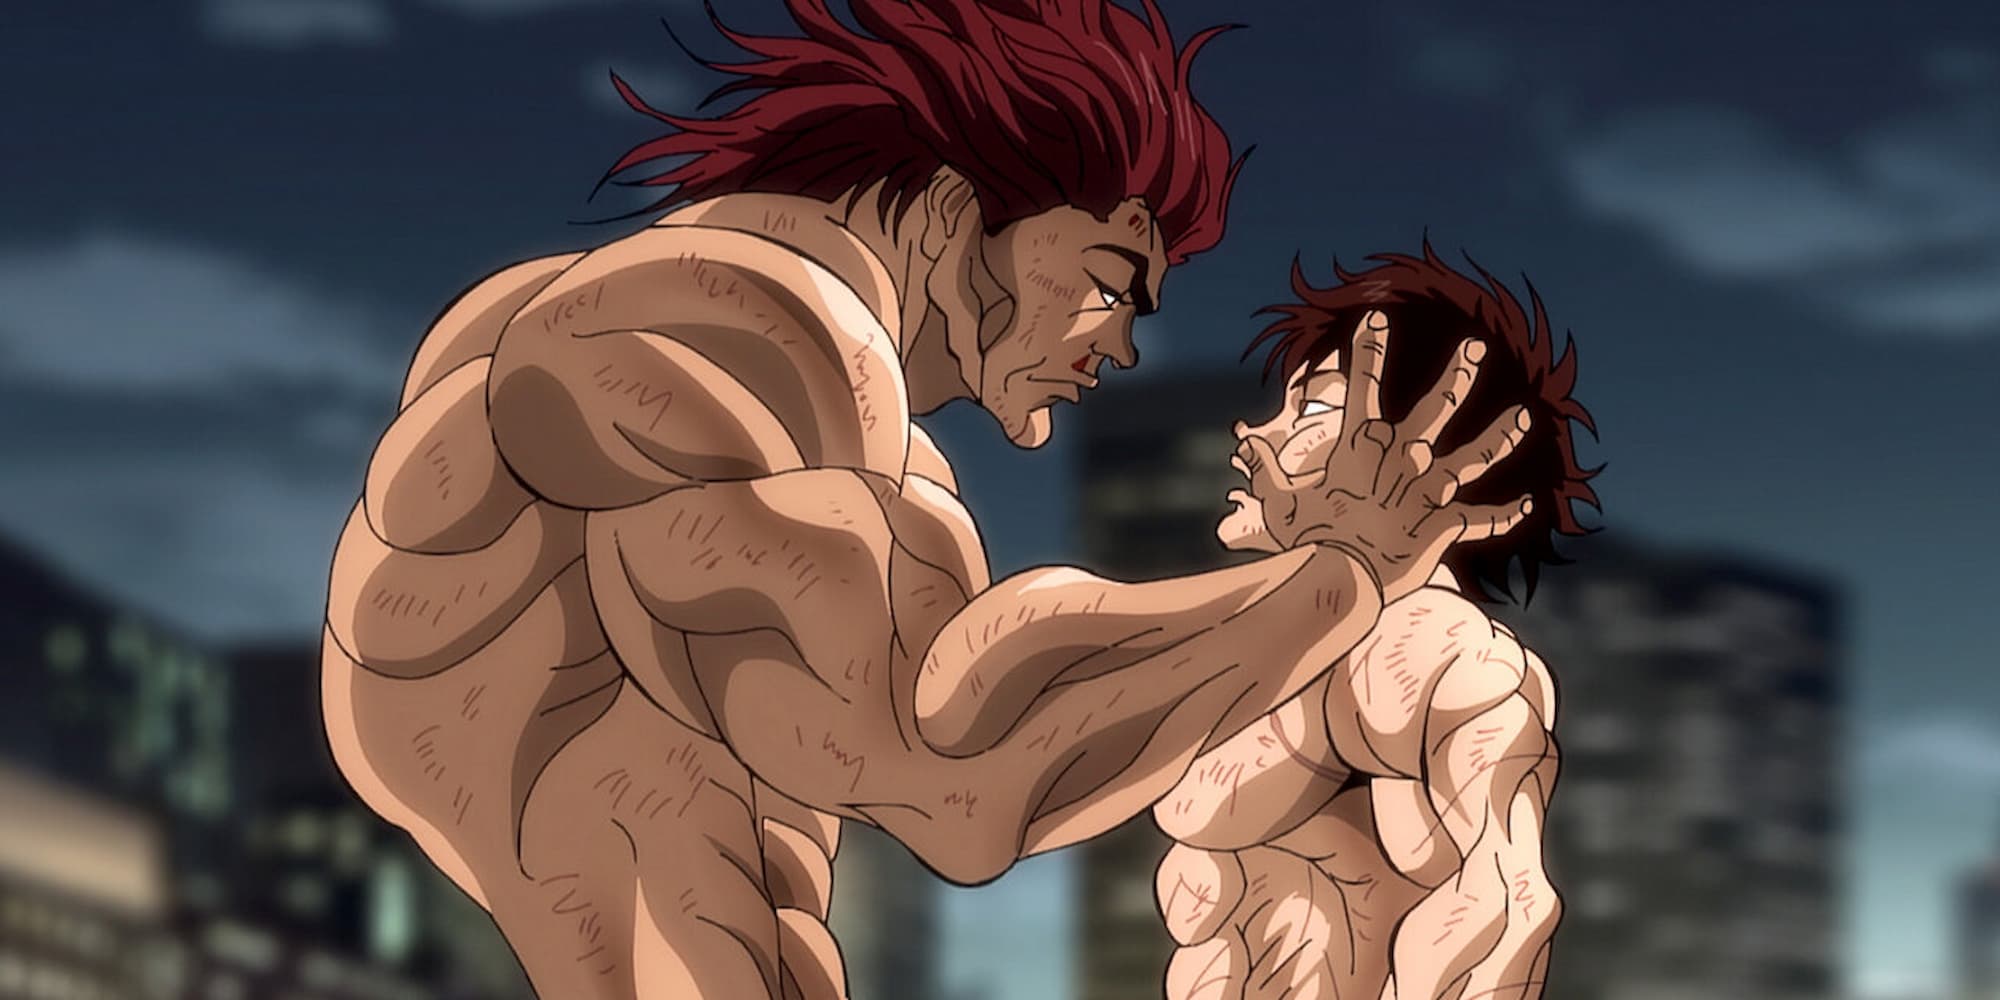 Baki Hanma season 2 part 2 reveals character designs and voice actors for  Yuichiro Hanma and two new characters